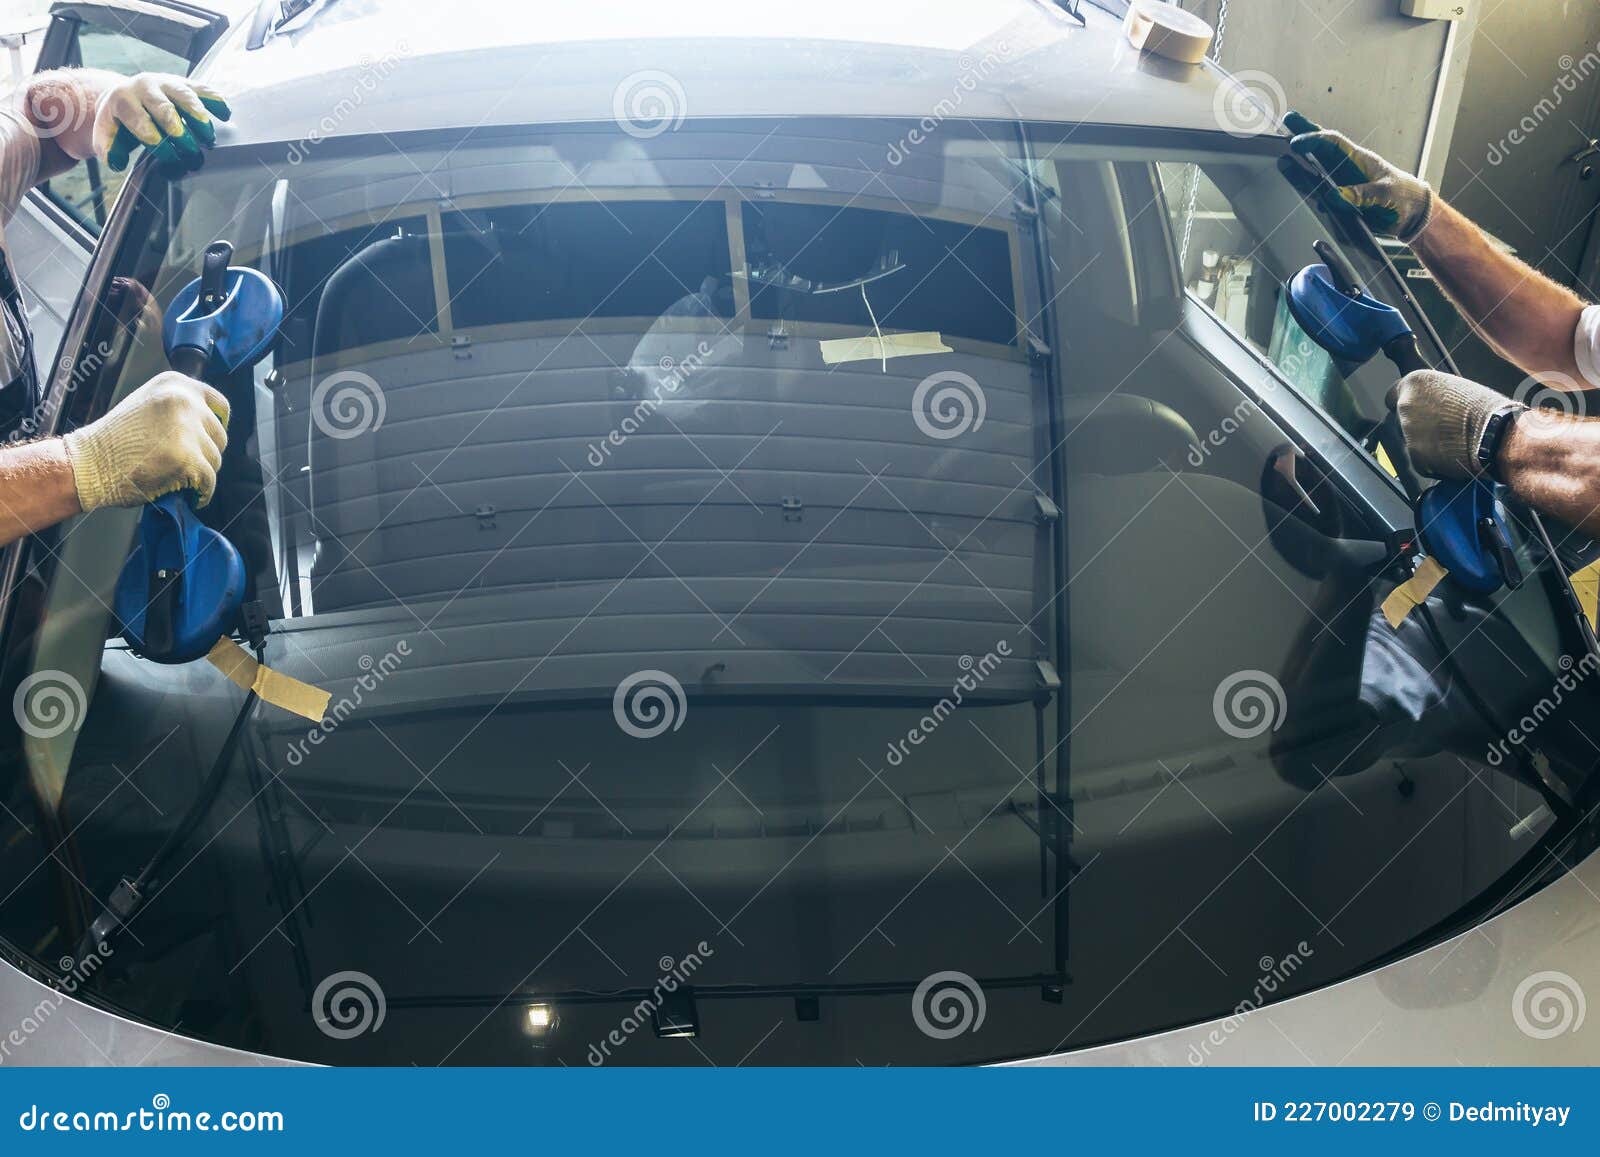 mechanic workers hands changes broken windscreen on new windshield on car in service station close up